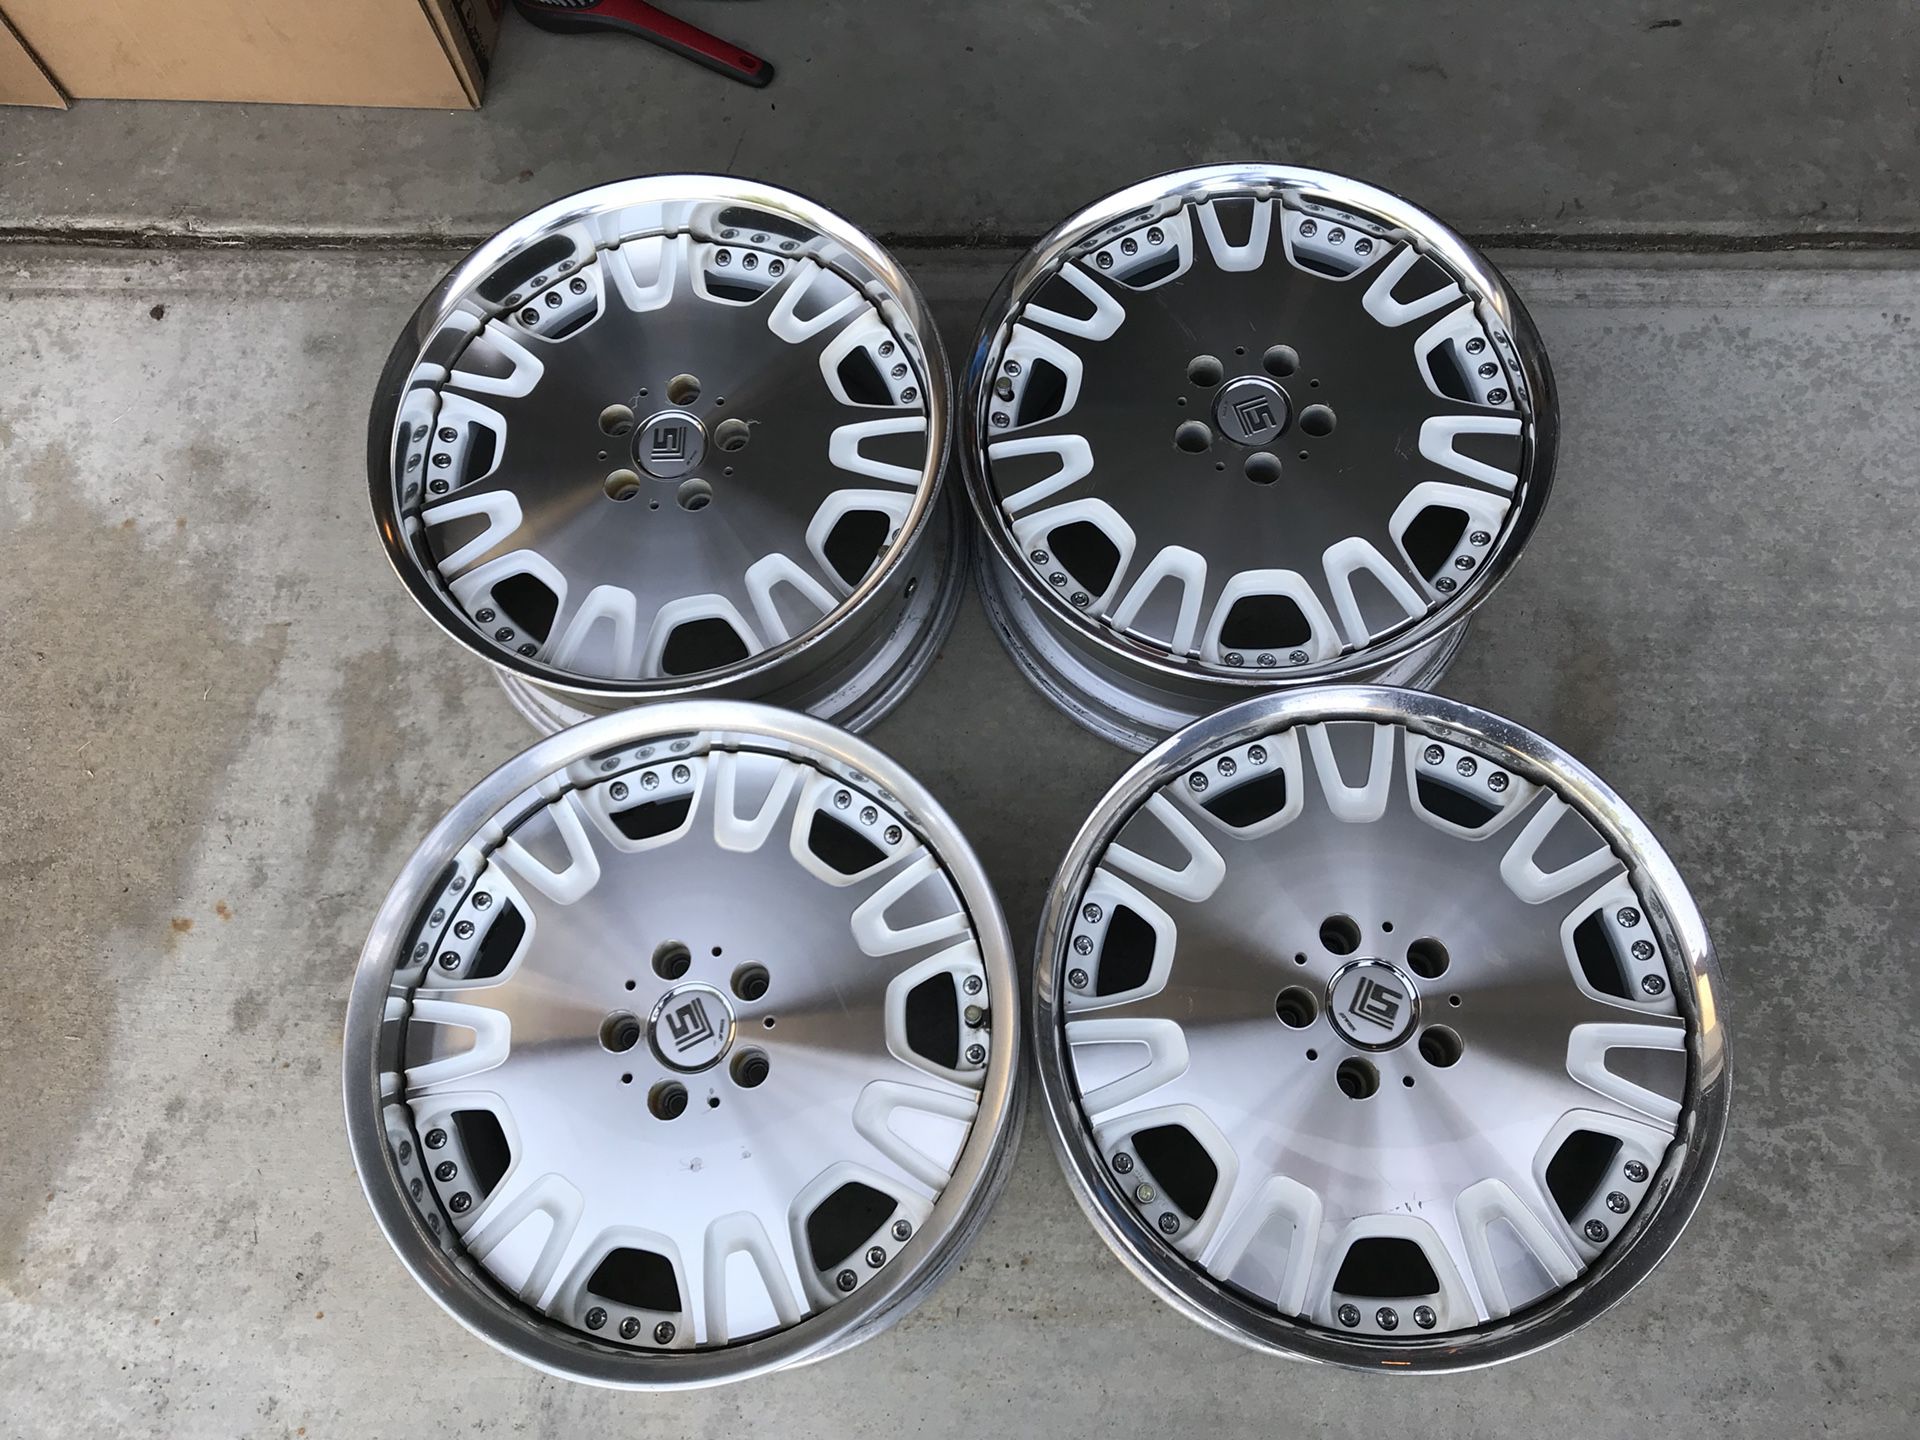 Work wheels LS507 3 piece rims 5x114.3 19 inch staggered for Sale